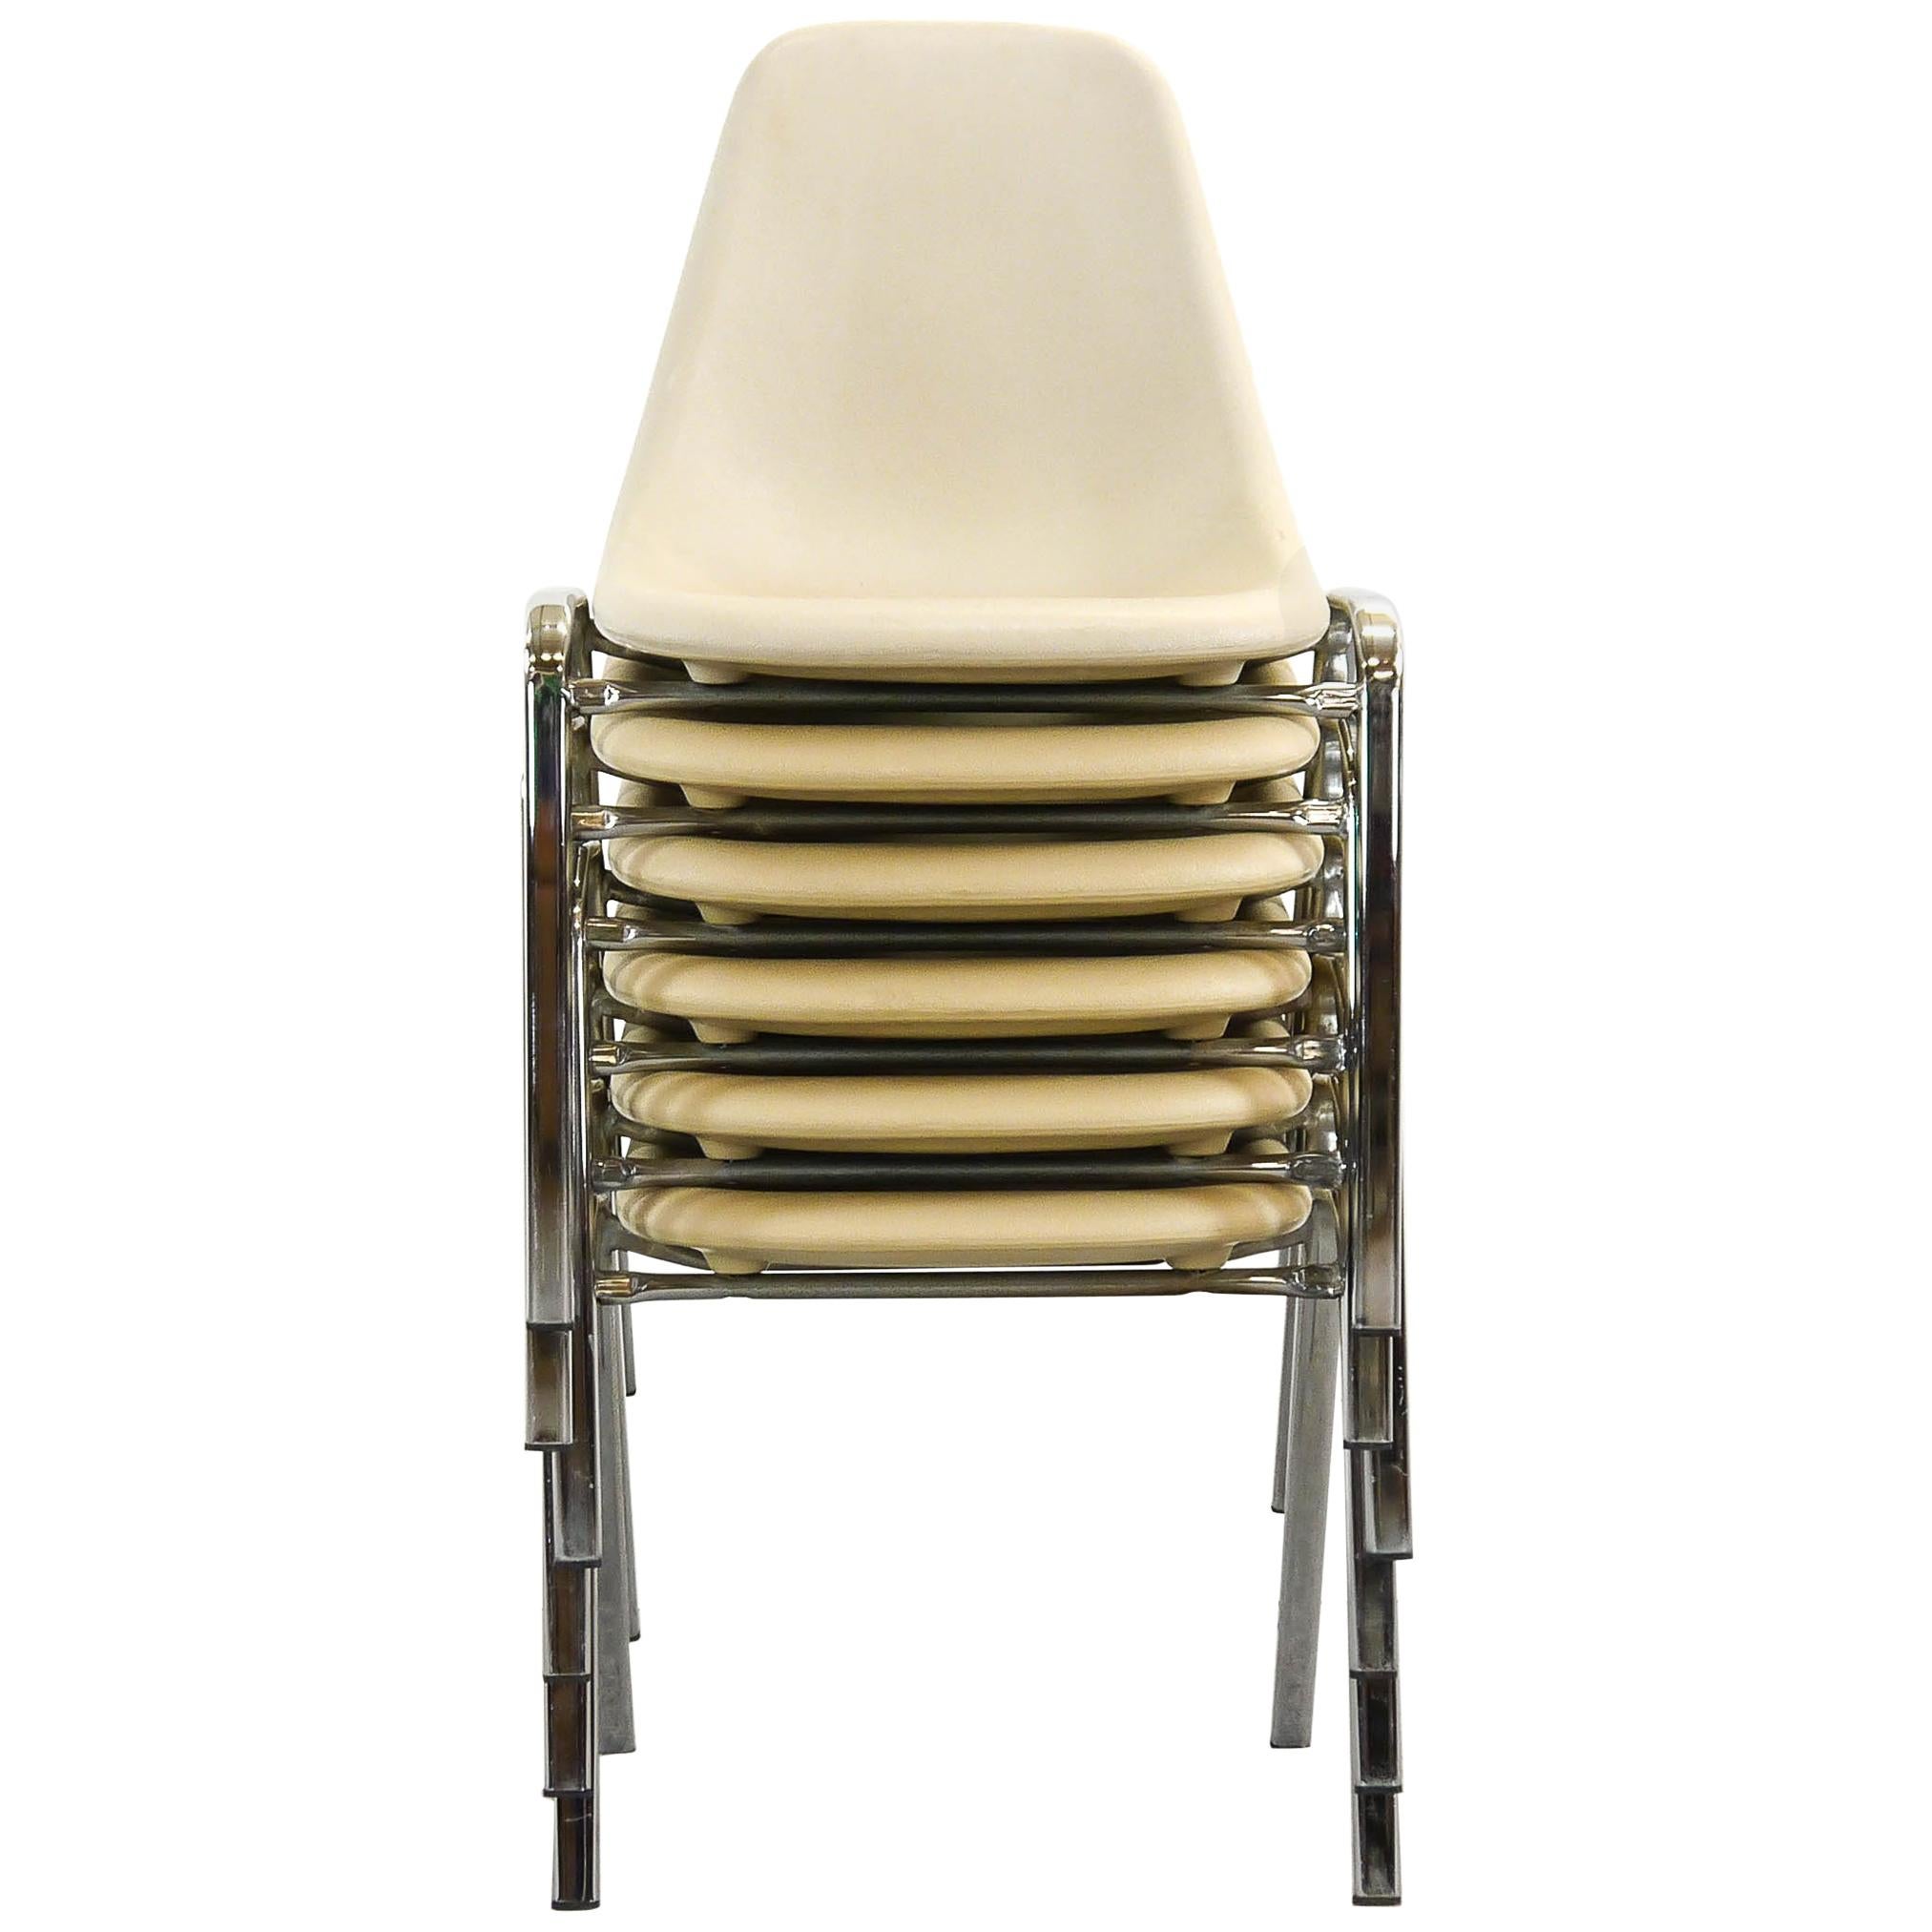 Set of 6 Off-White Stacking Chairs by O. F. Pollack, Sulo Germany 1978 Space Age